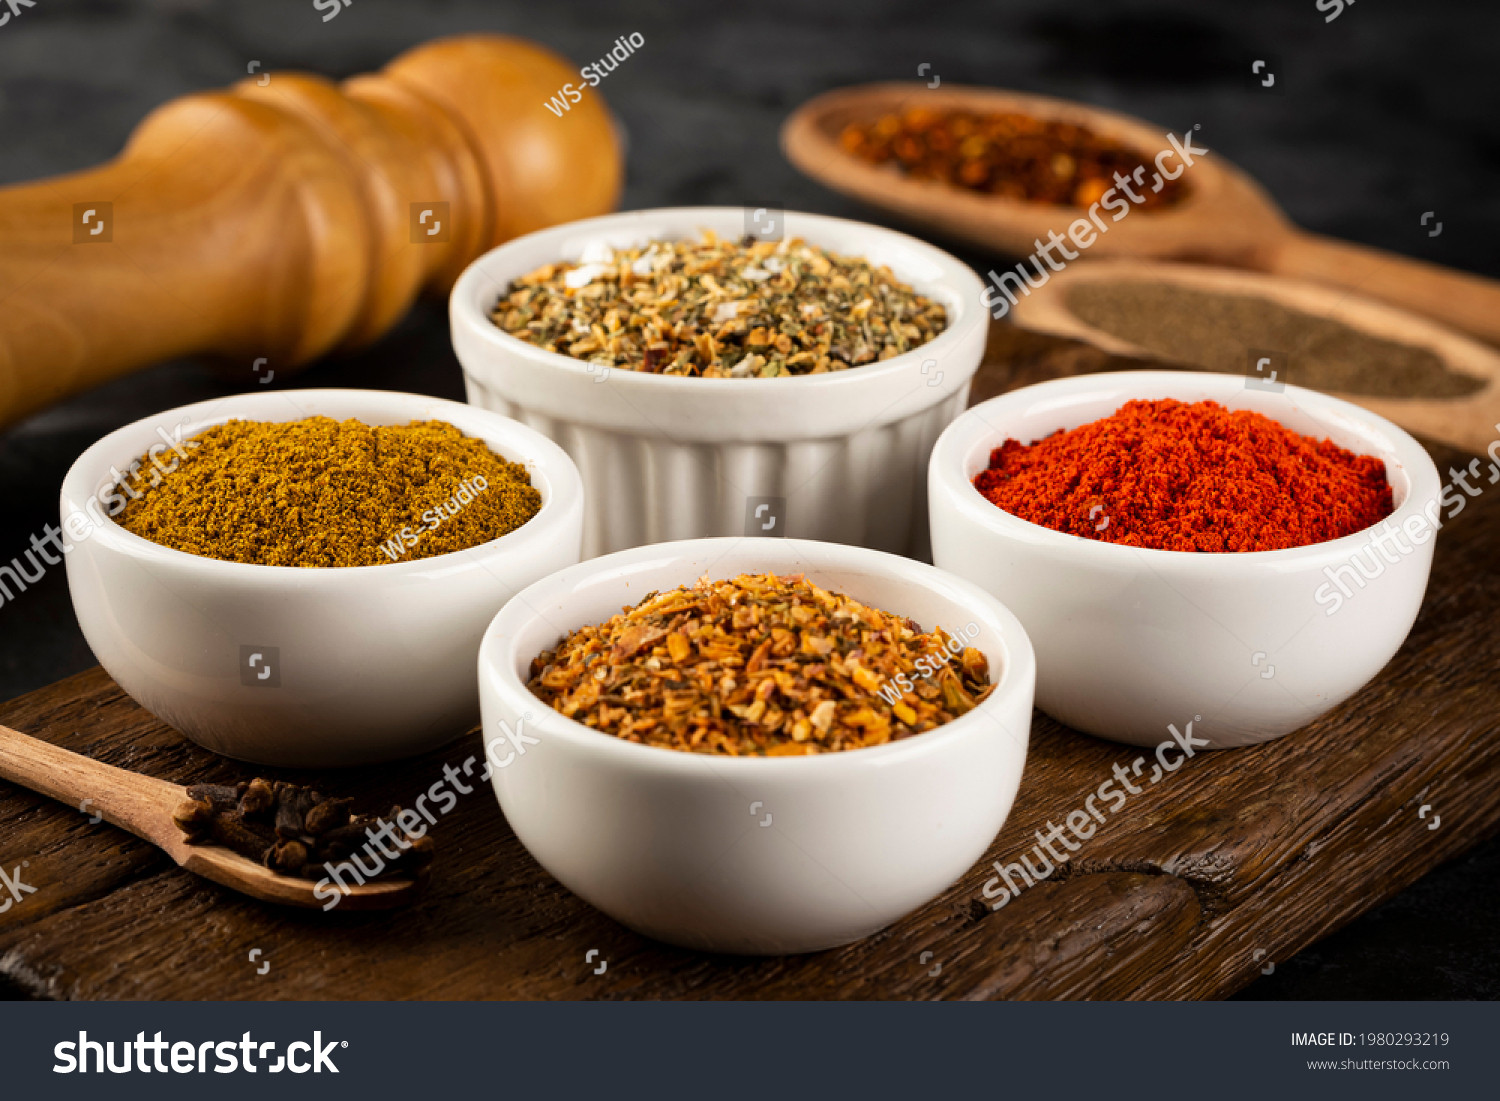 Variety of spices and seasonings on the table. #1980293219